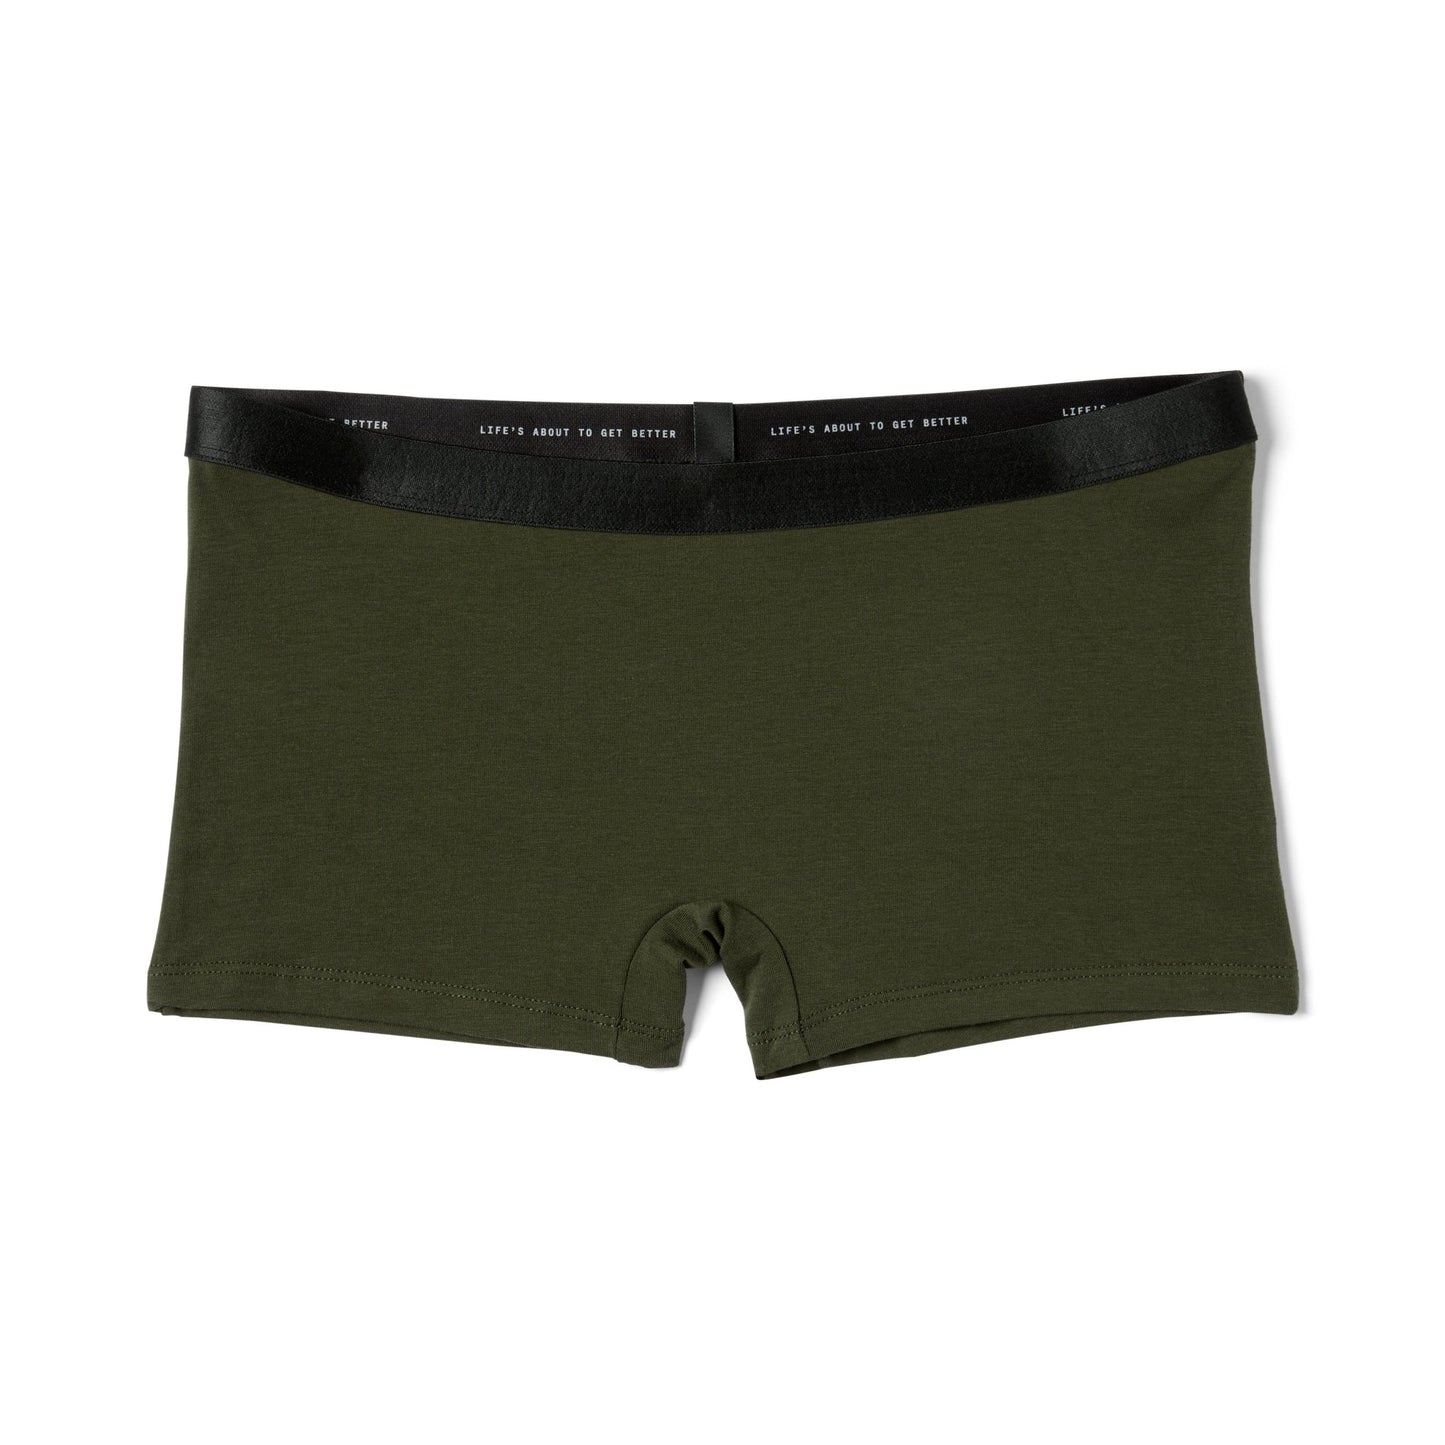 A pair of Better Cotton Boyshorts from Better Clothing Company, with a black waistband, offering more coverage.